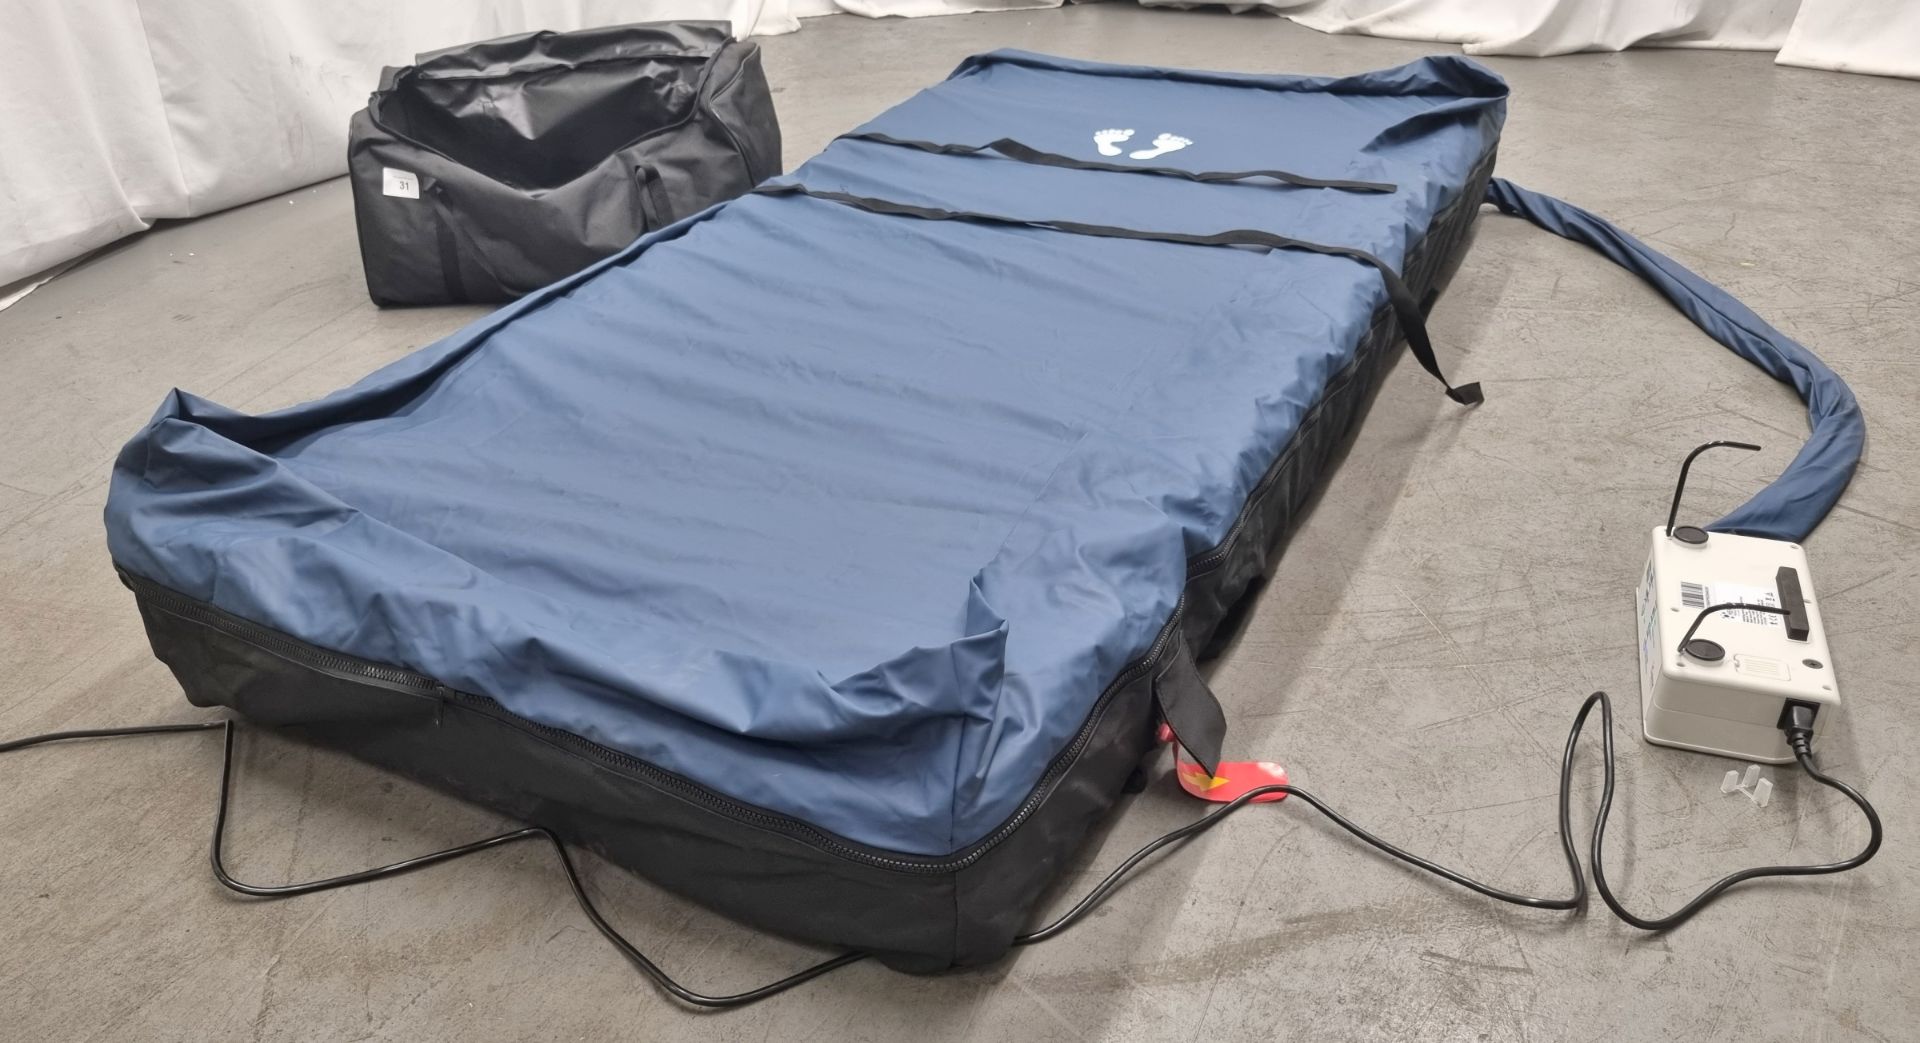 10x Herida Argyll II dynamic airflow mattress systems with digital pump - boxed - Image 6 of 10